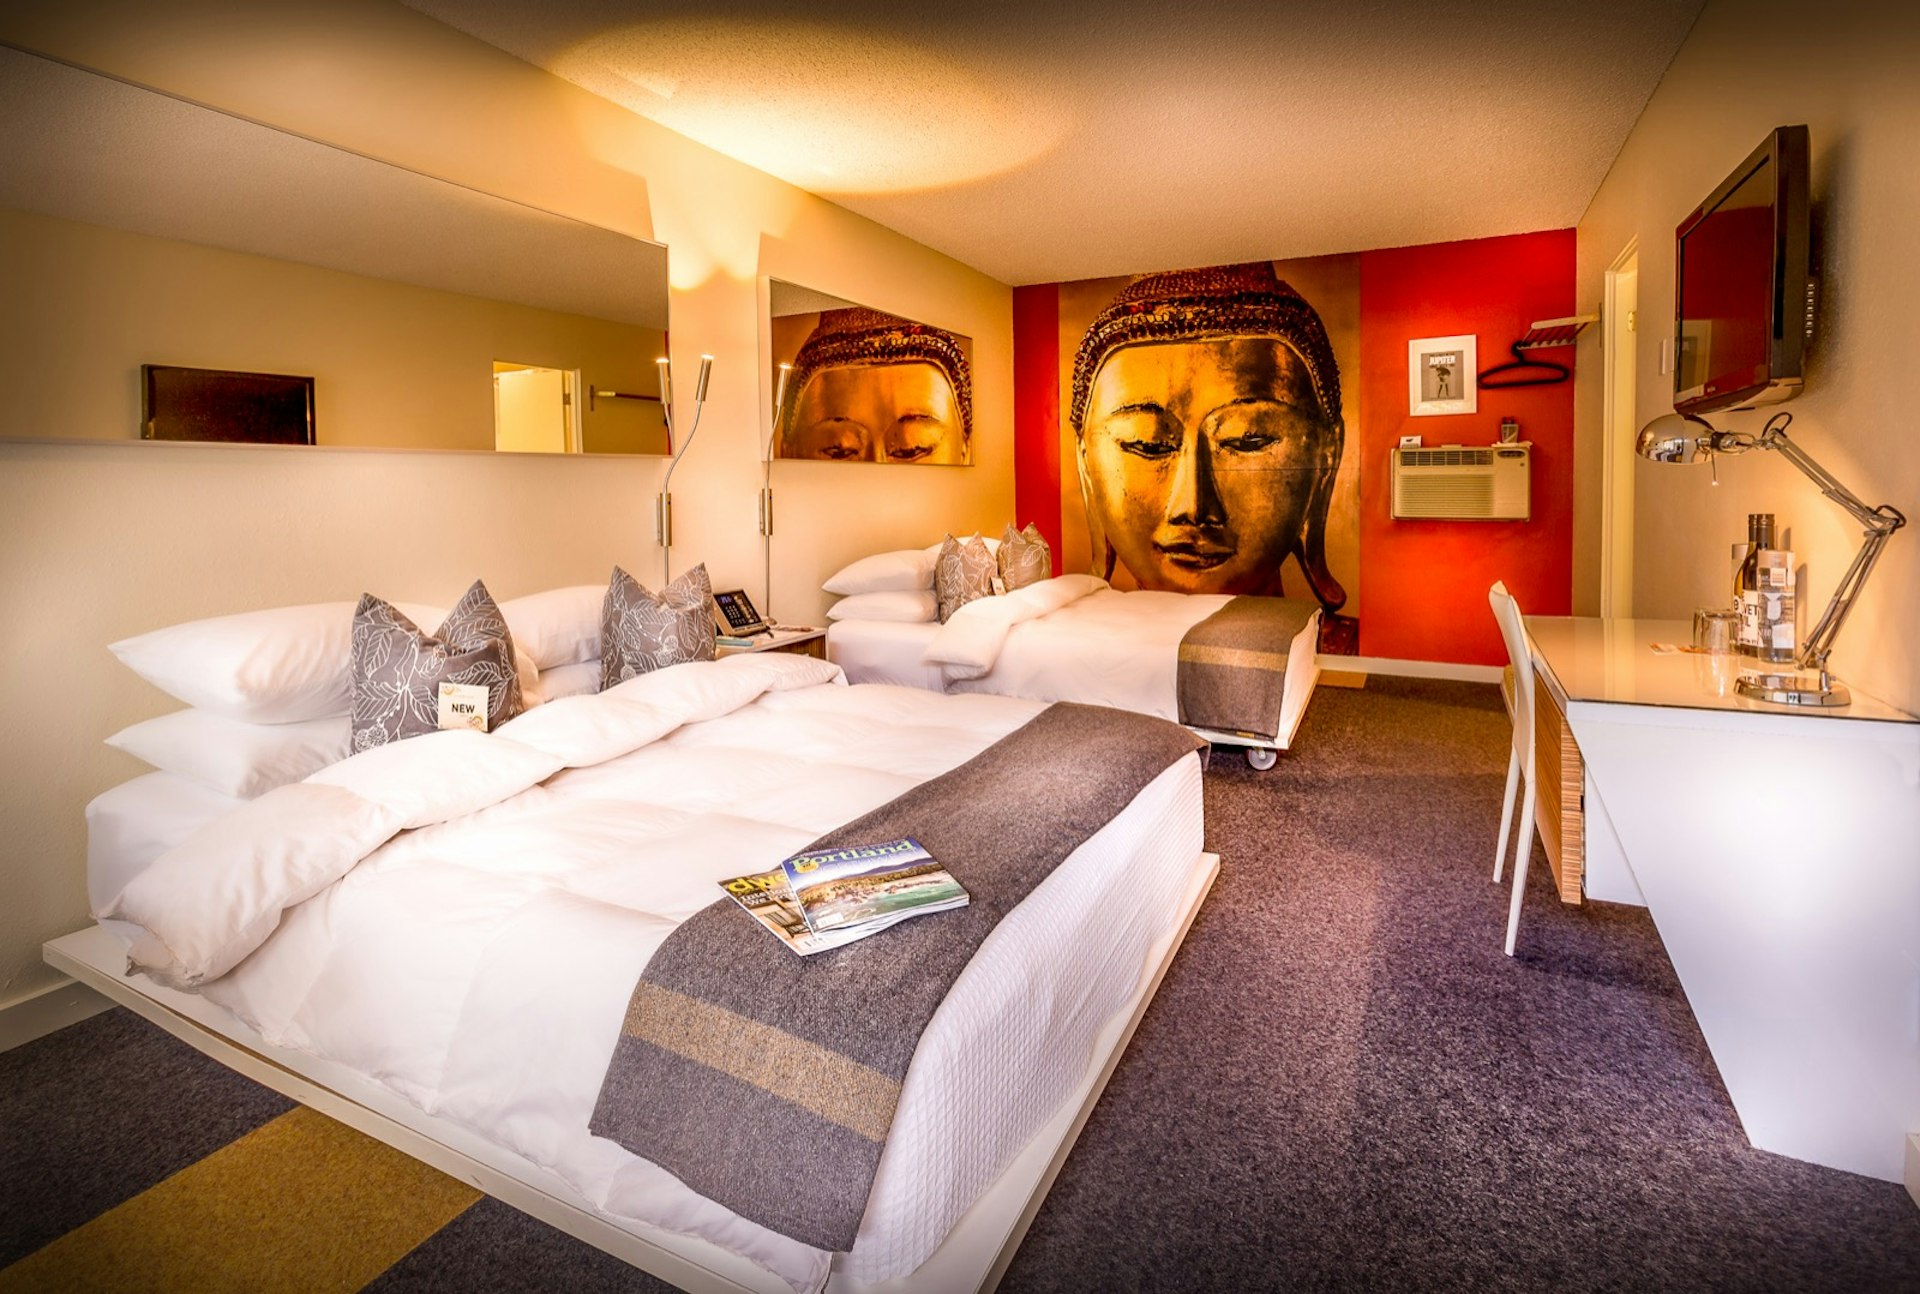 Inside a room at The Jupiter, with a red accent wall painted with the face of Buddha